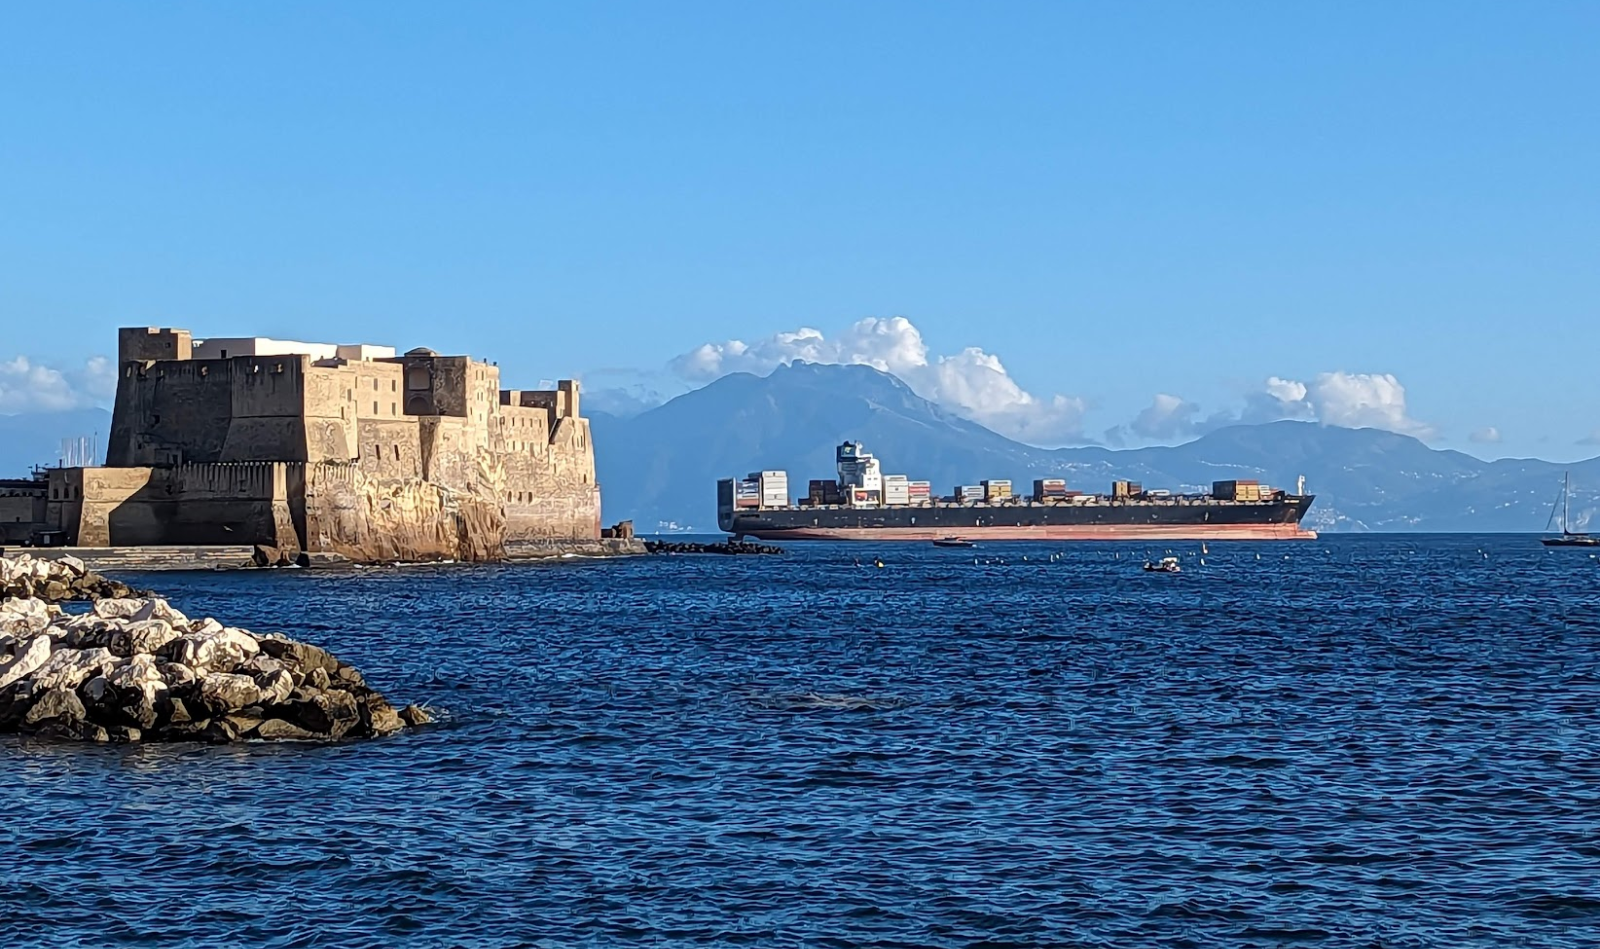 Castel dell'ovo in Naples on the seafront